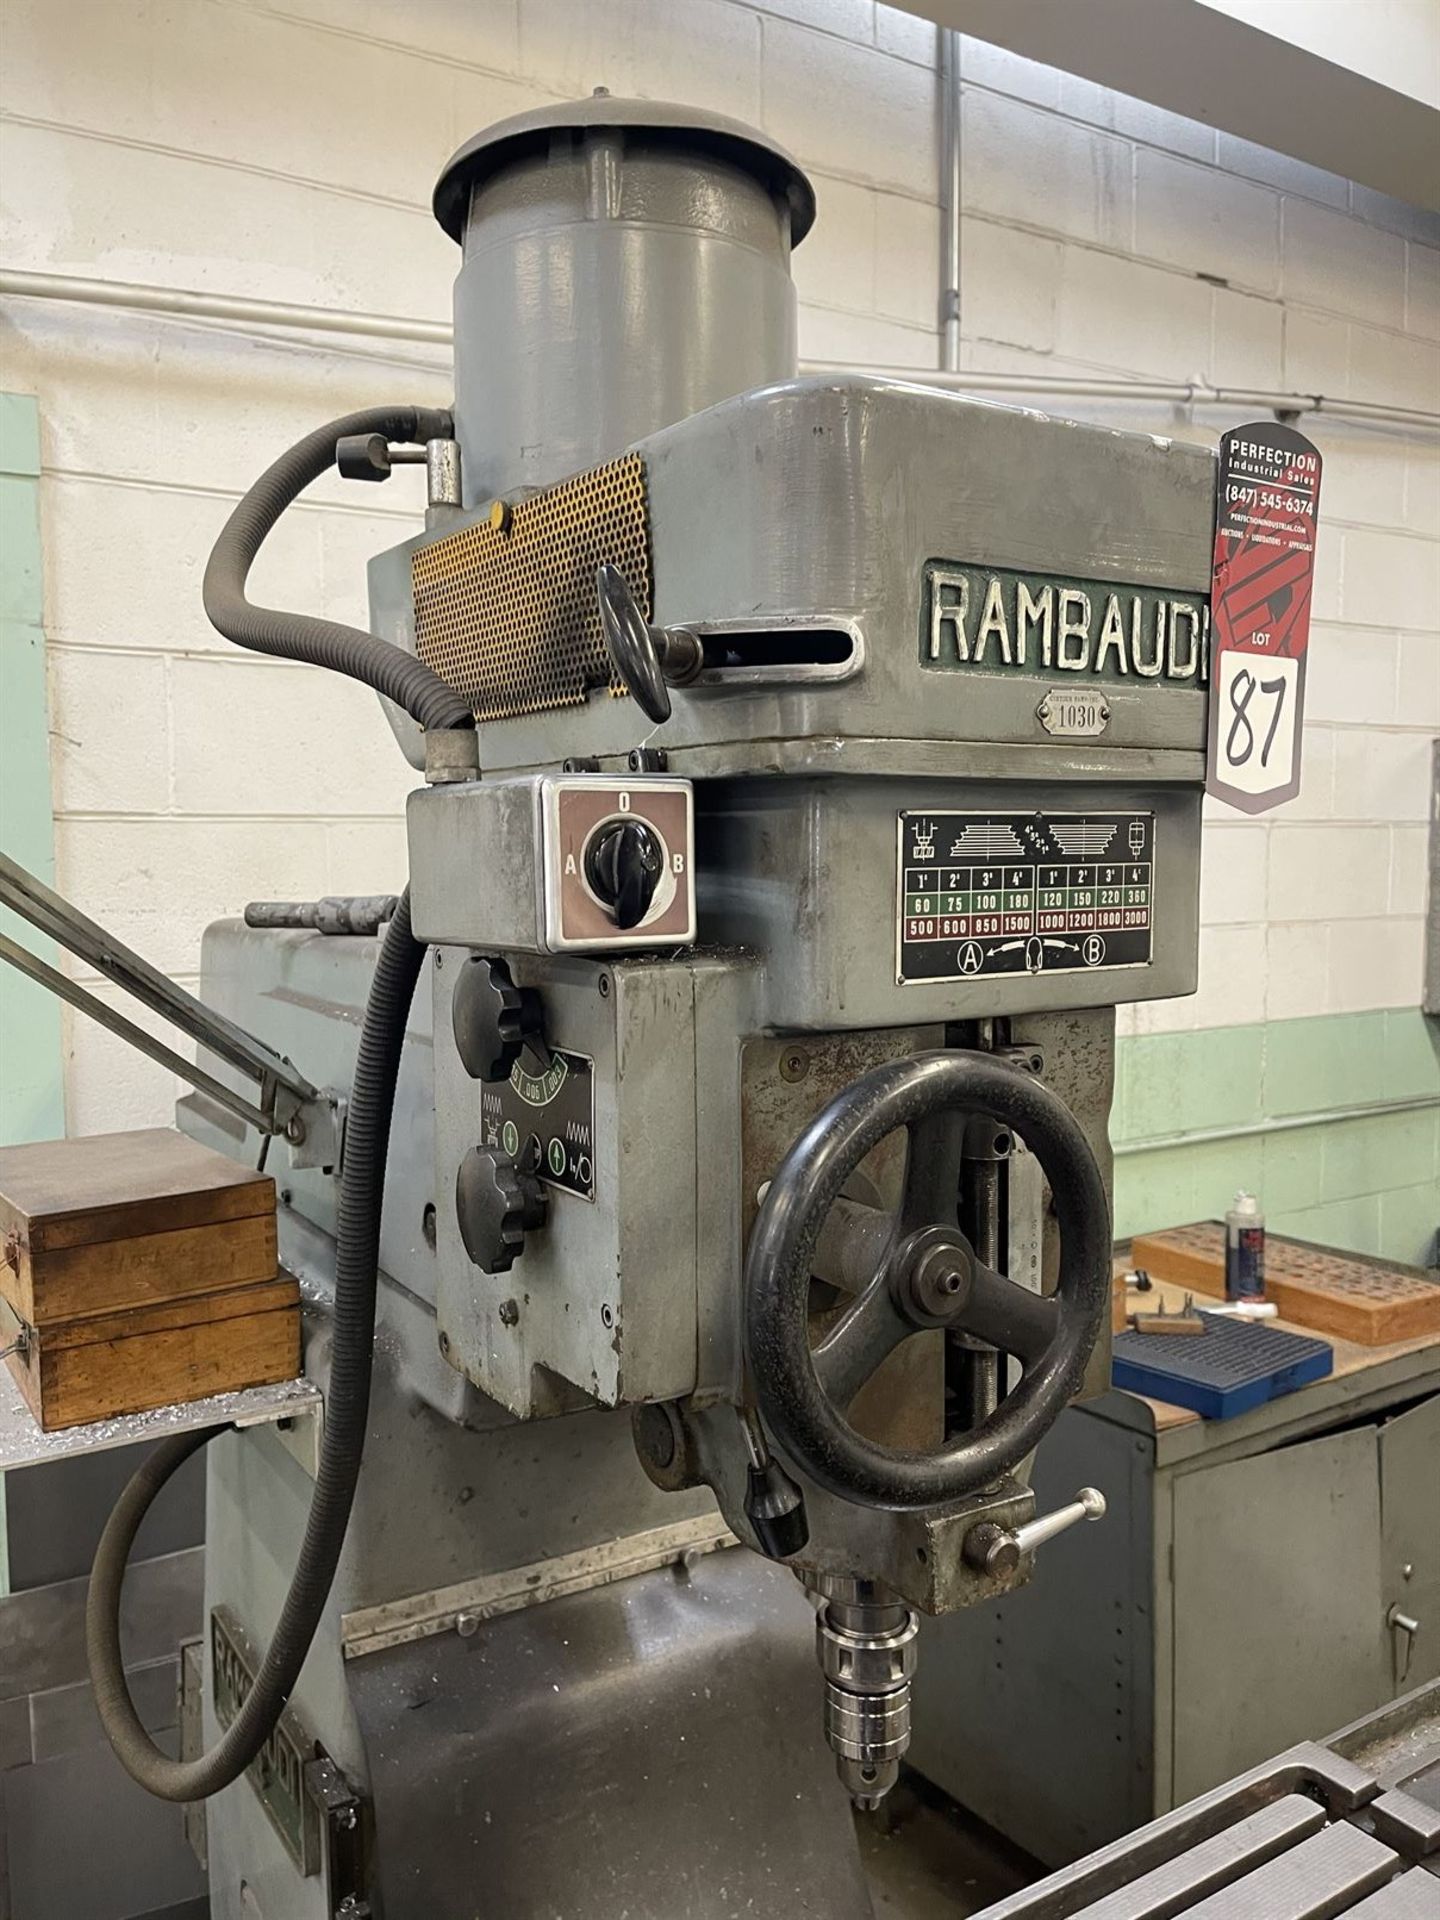 RAMBAUDI V3 Milling Machine, s/n na, 12" x 42" Table, 60-3000 RPM, Spindle Speed, Power Feed, - Image 4 of 7